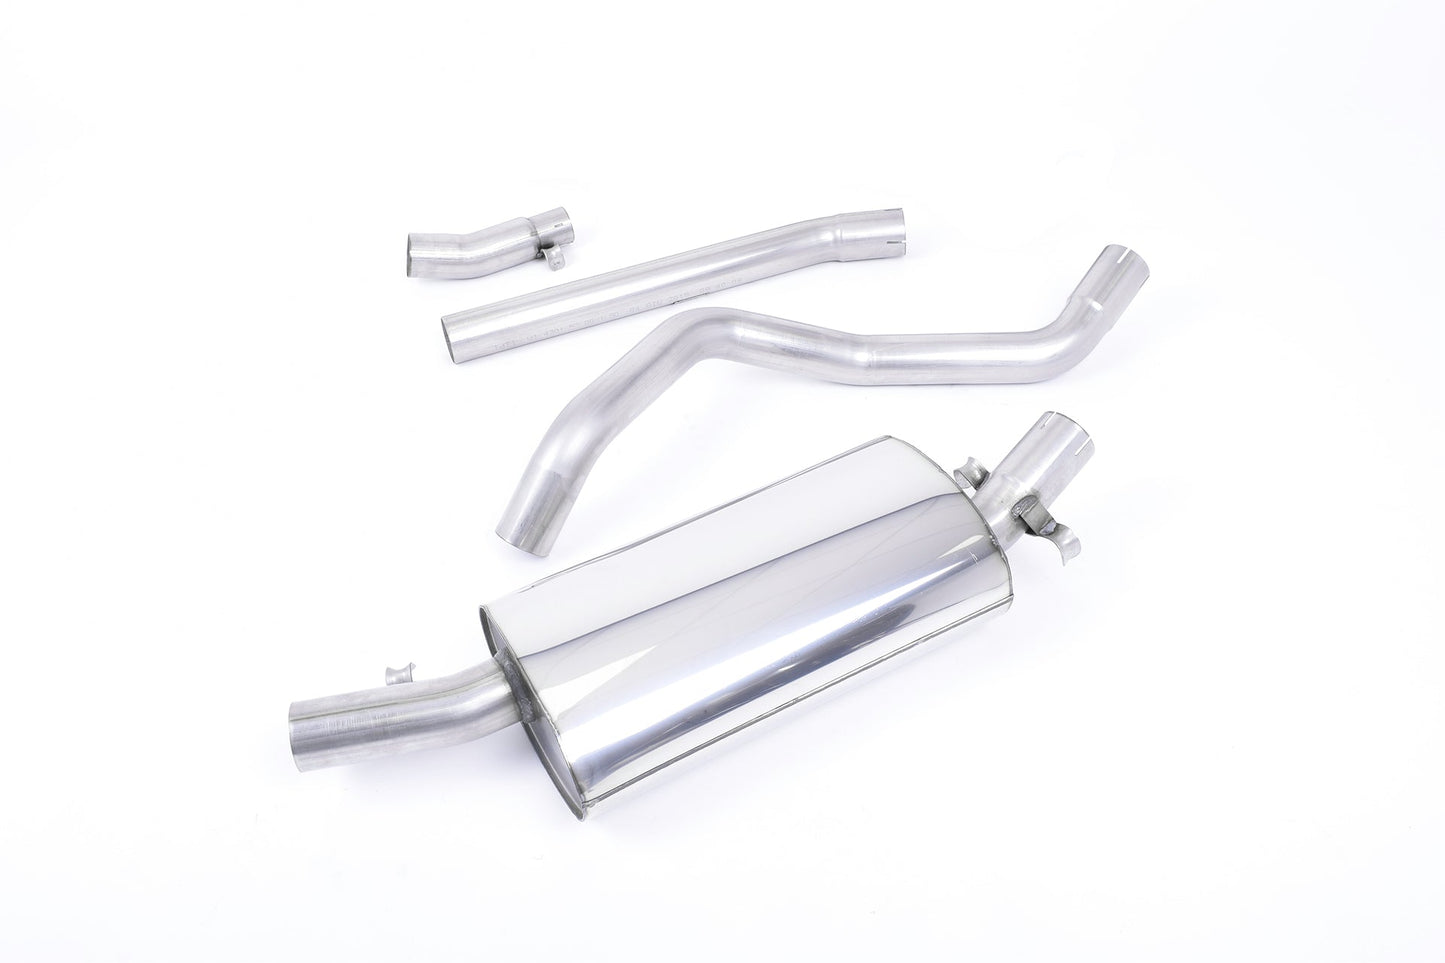 MillTek MCXVW208 Volkswagen Golf Downpipe-back Non-Resonated (Louder) for fitment to the OE Downpipe